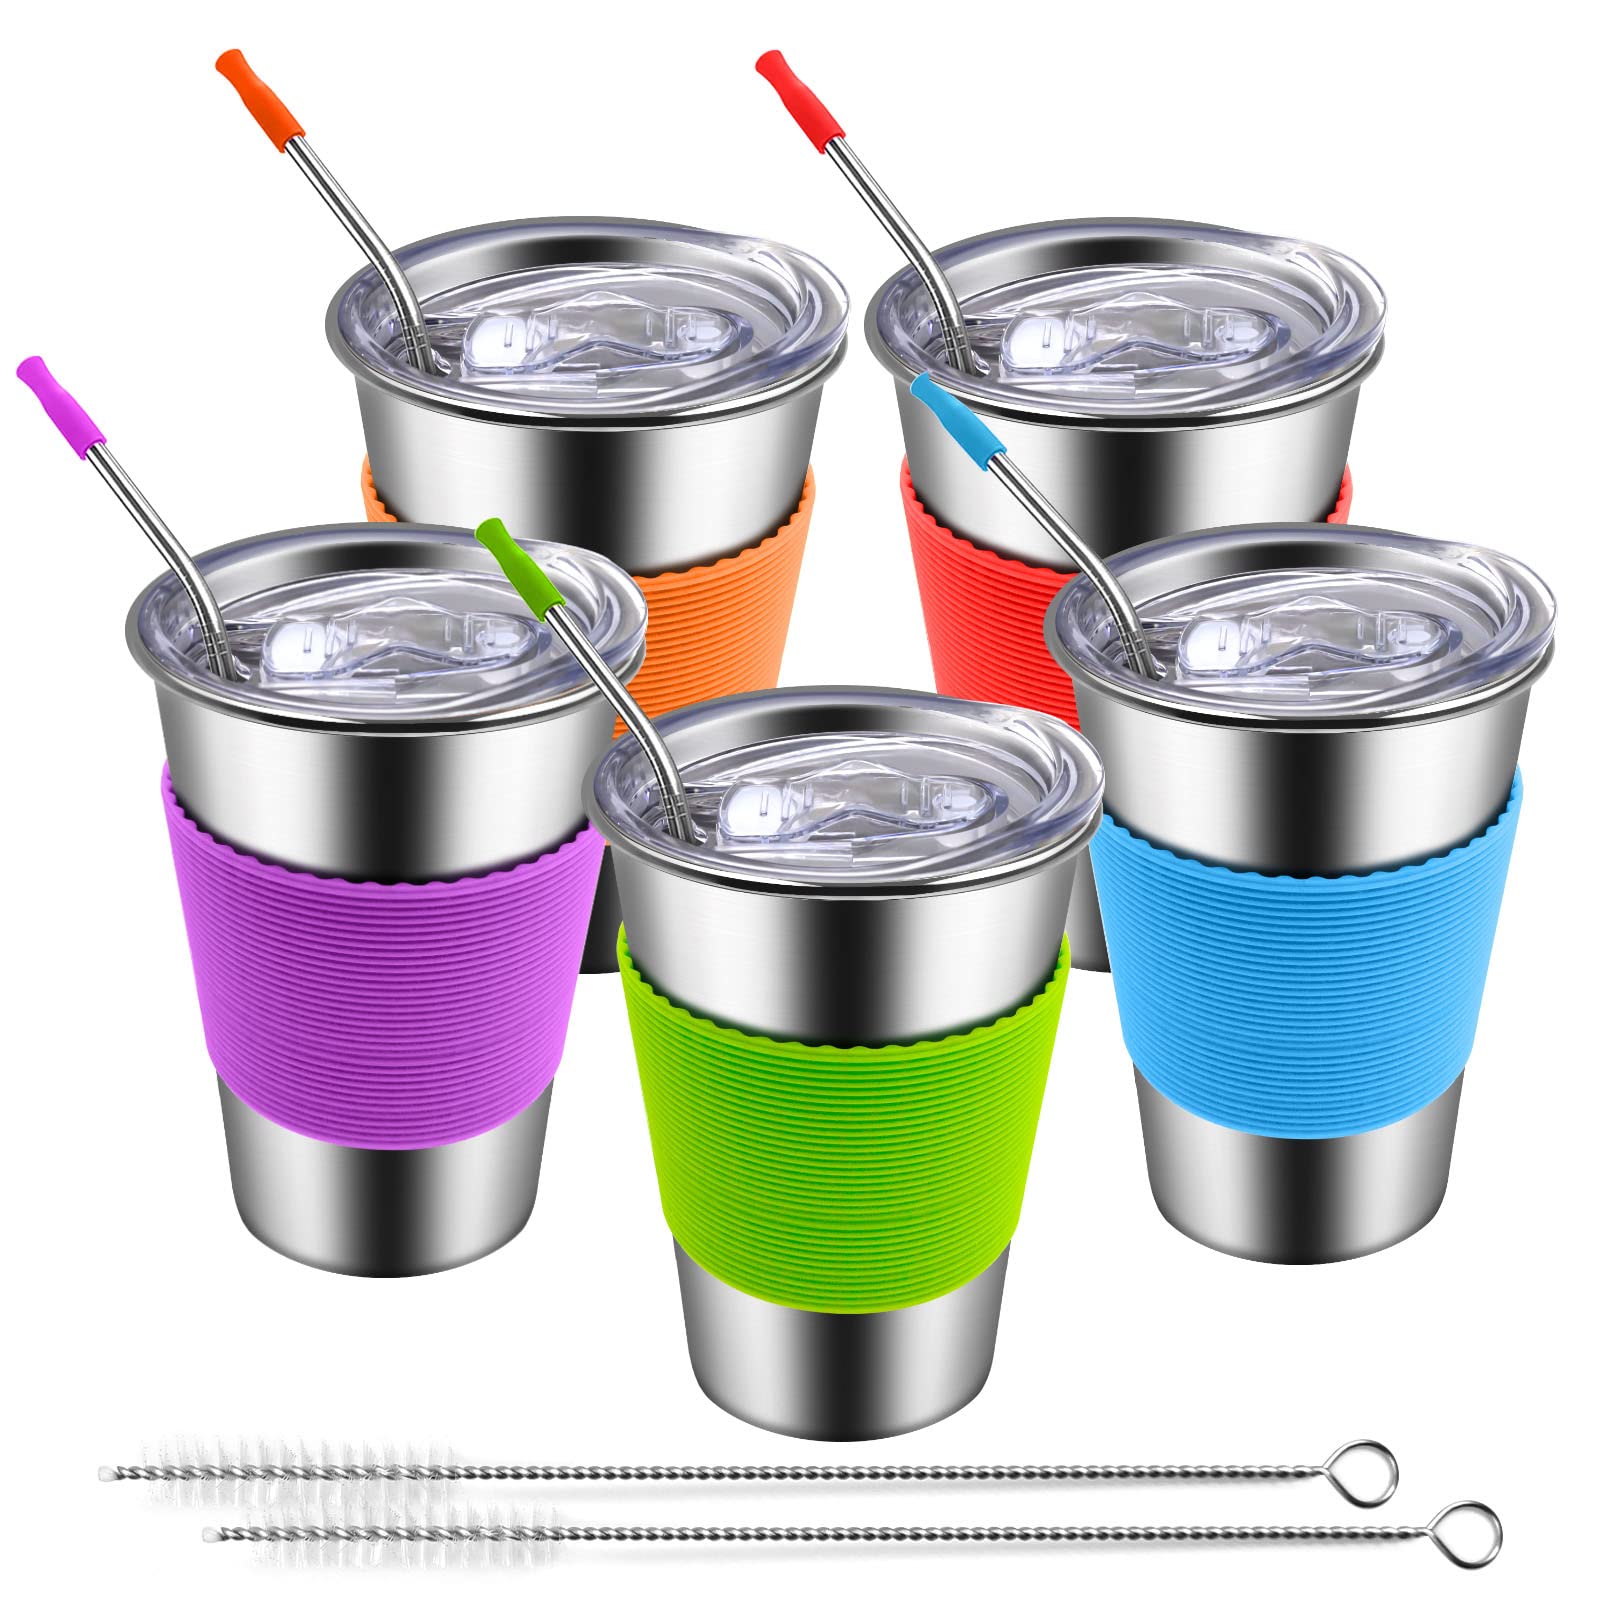 12oz Kids Toddler Straw Cup with Lids,Spill Proof children